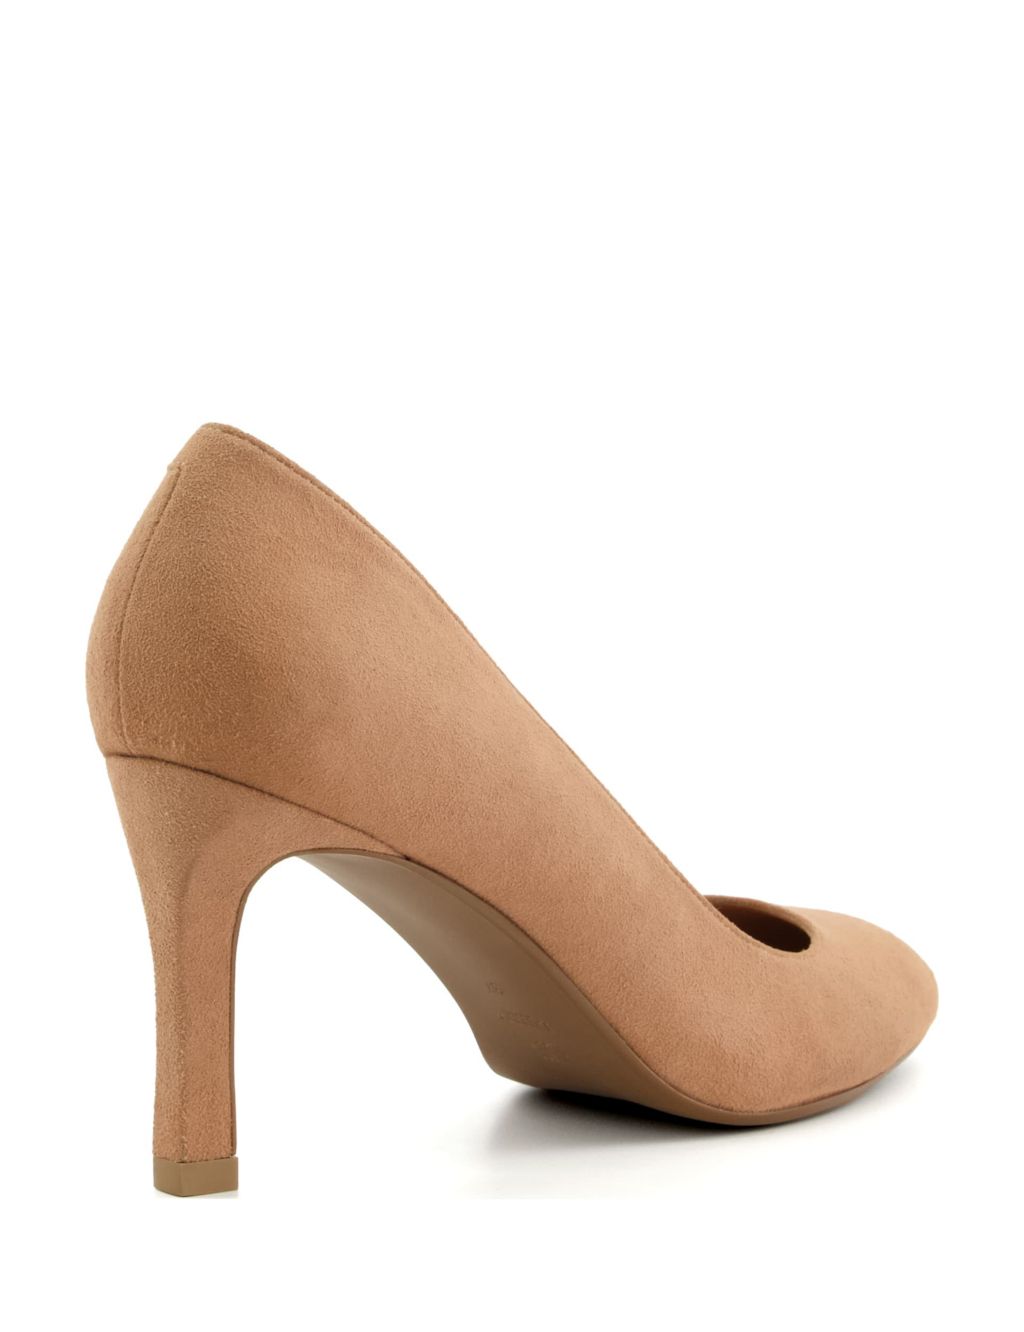 Leather Stiletto Heel Court Shoes image 3